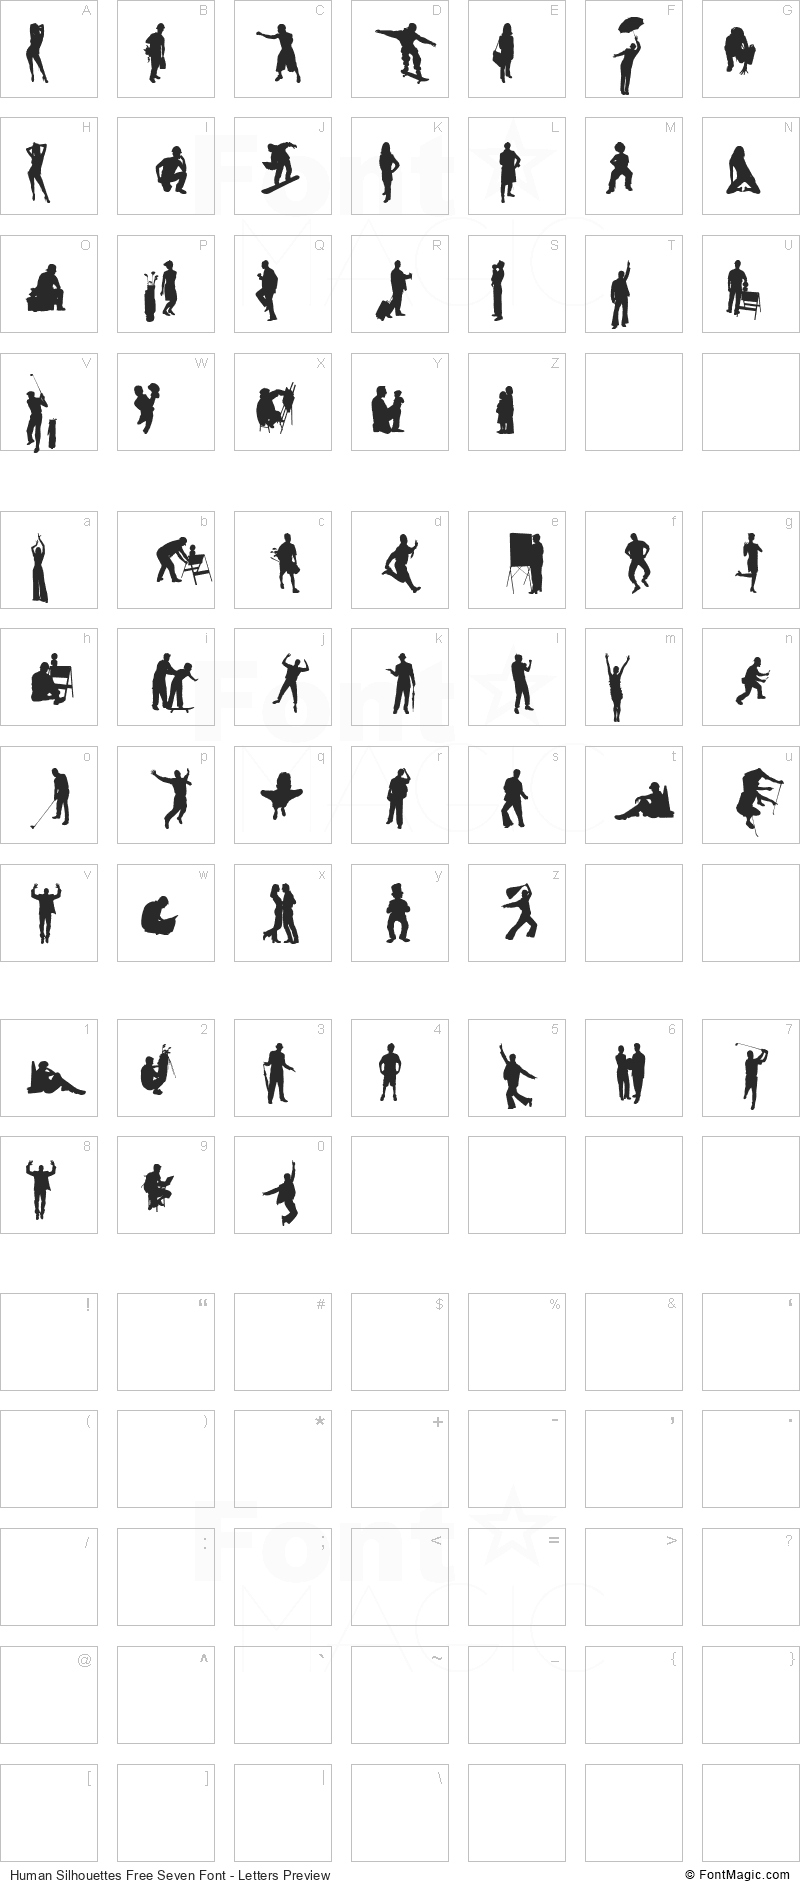 Human Silhouettes Free Seven Font - All Latters Preview Chart